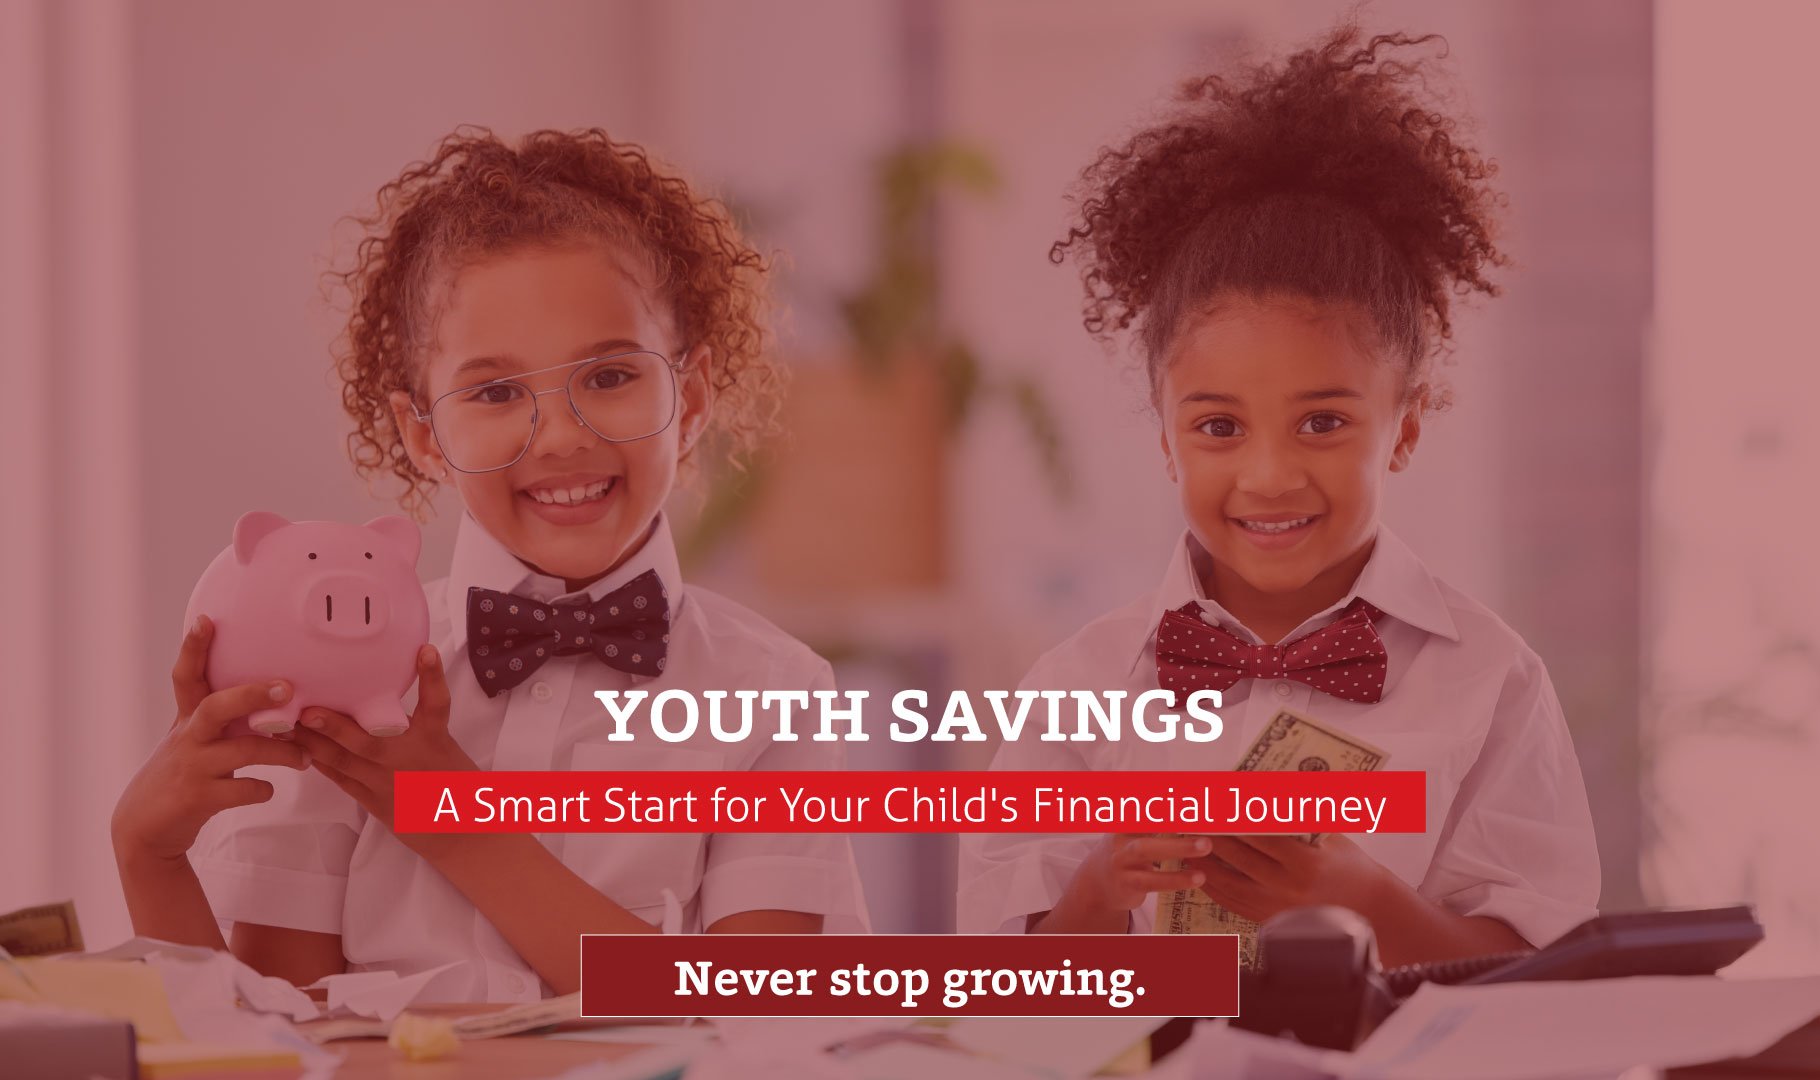 Youth Savings: A Smart Start for Your Child's Financial Journey